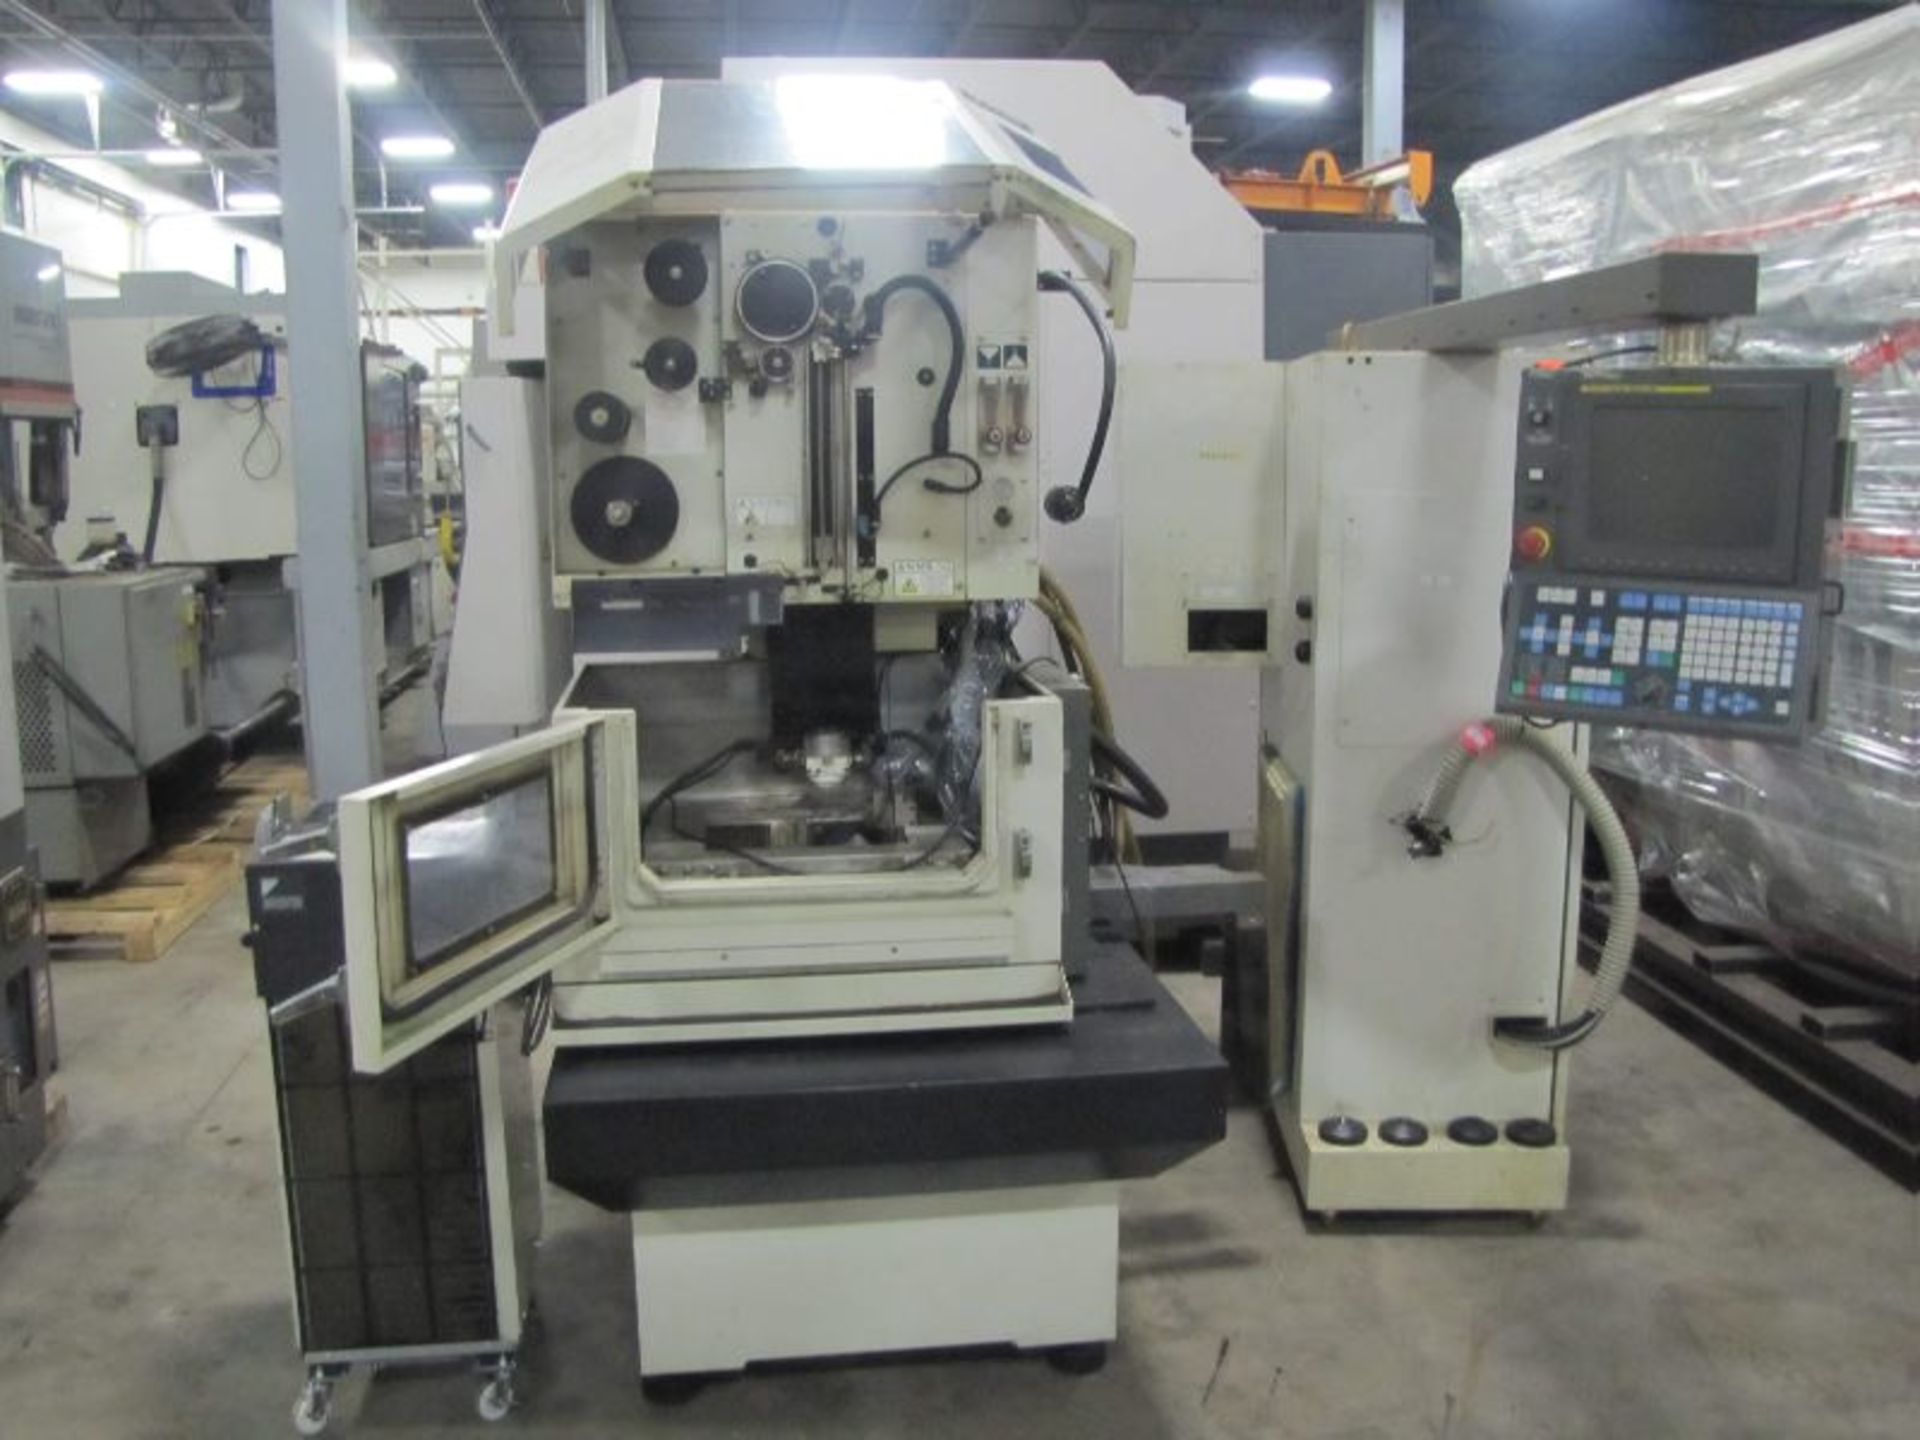 2005 Fanuc Wire EDM Model OiC Robocut with Fanuc Series 180iS-WB Control